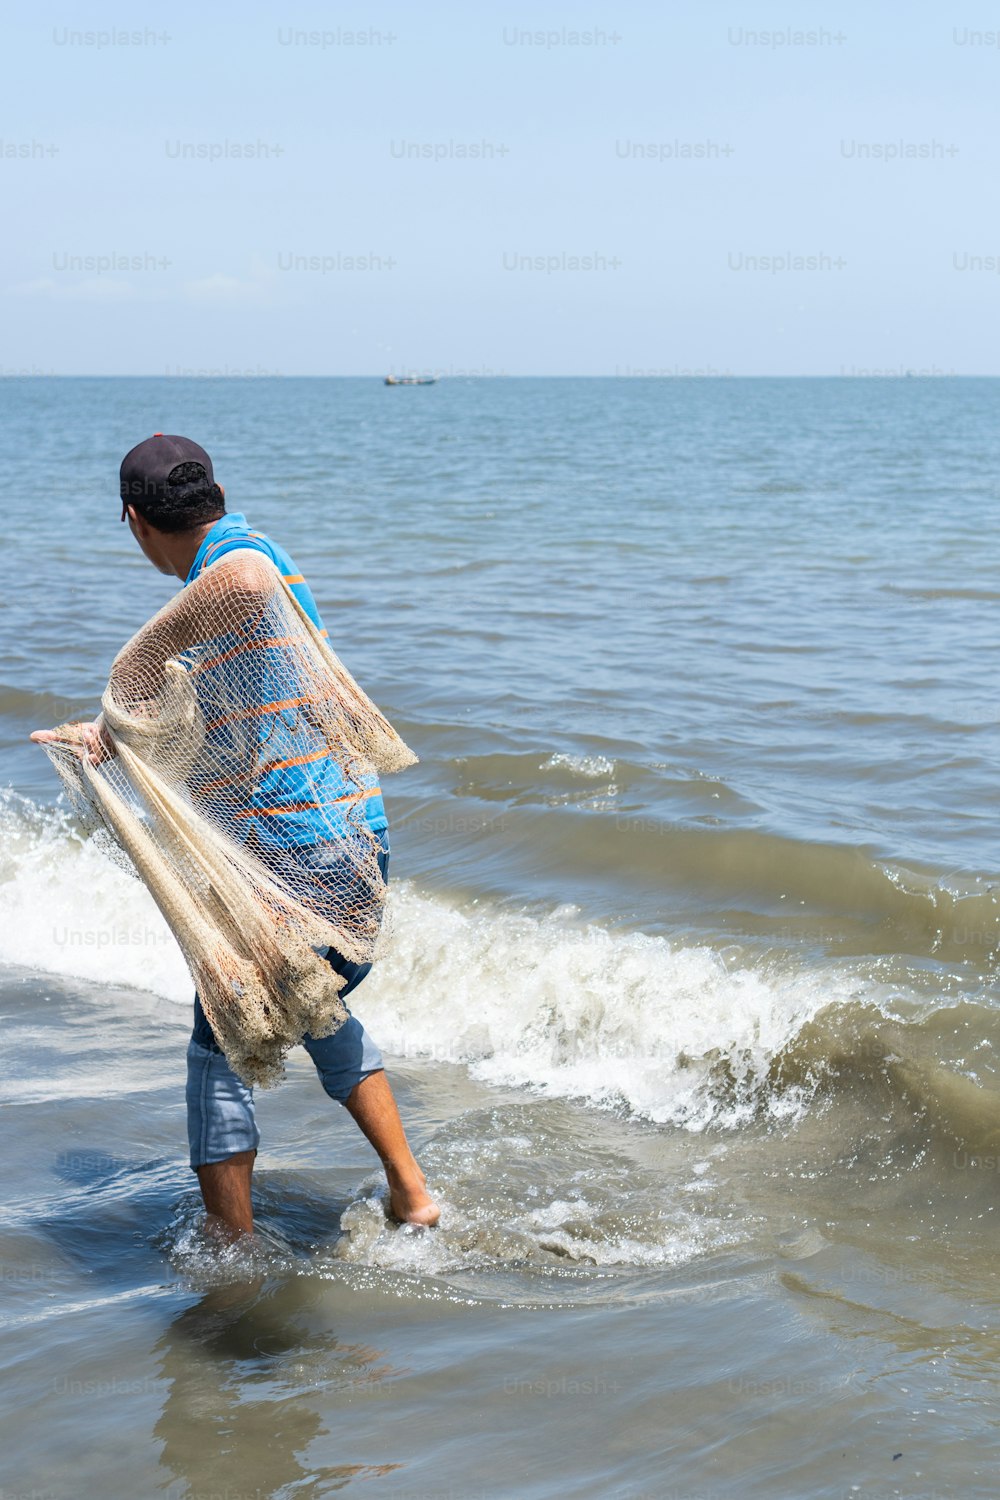 Latin Fisherman casting a net in the sea